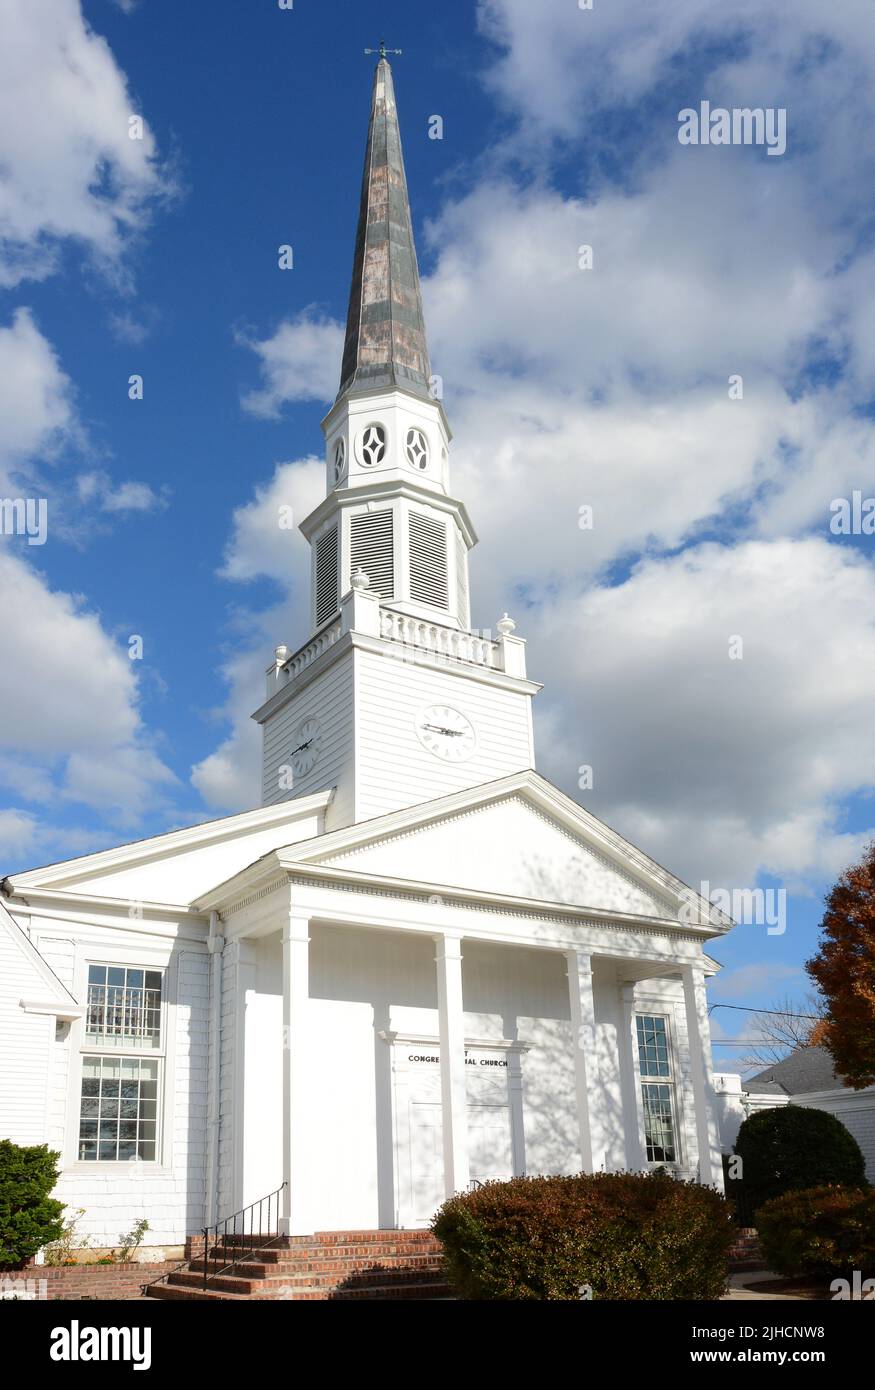 WESTFIELD, NEW JERSEY - 02 NOV 2019: The First Congregational Church sign in the historic downtown area of Westfield. Stock Photo